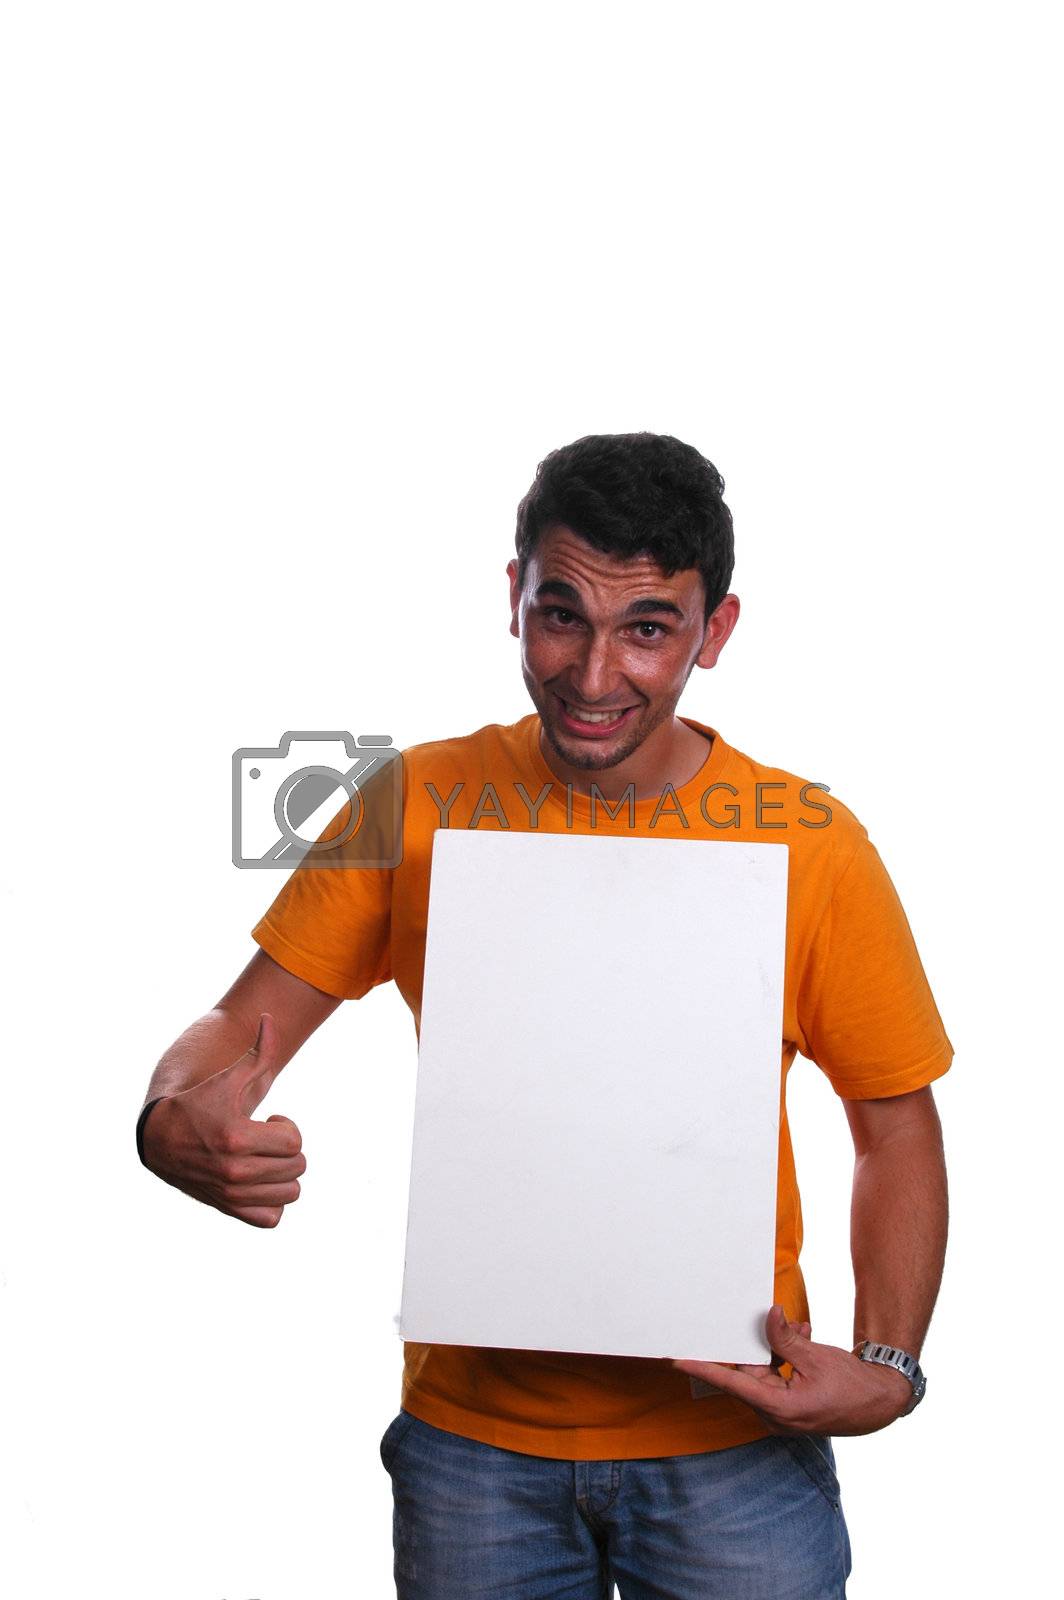 Royalty free image of young man pointing to white board by raalves